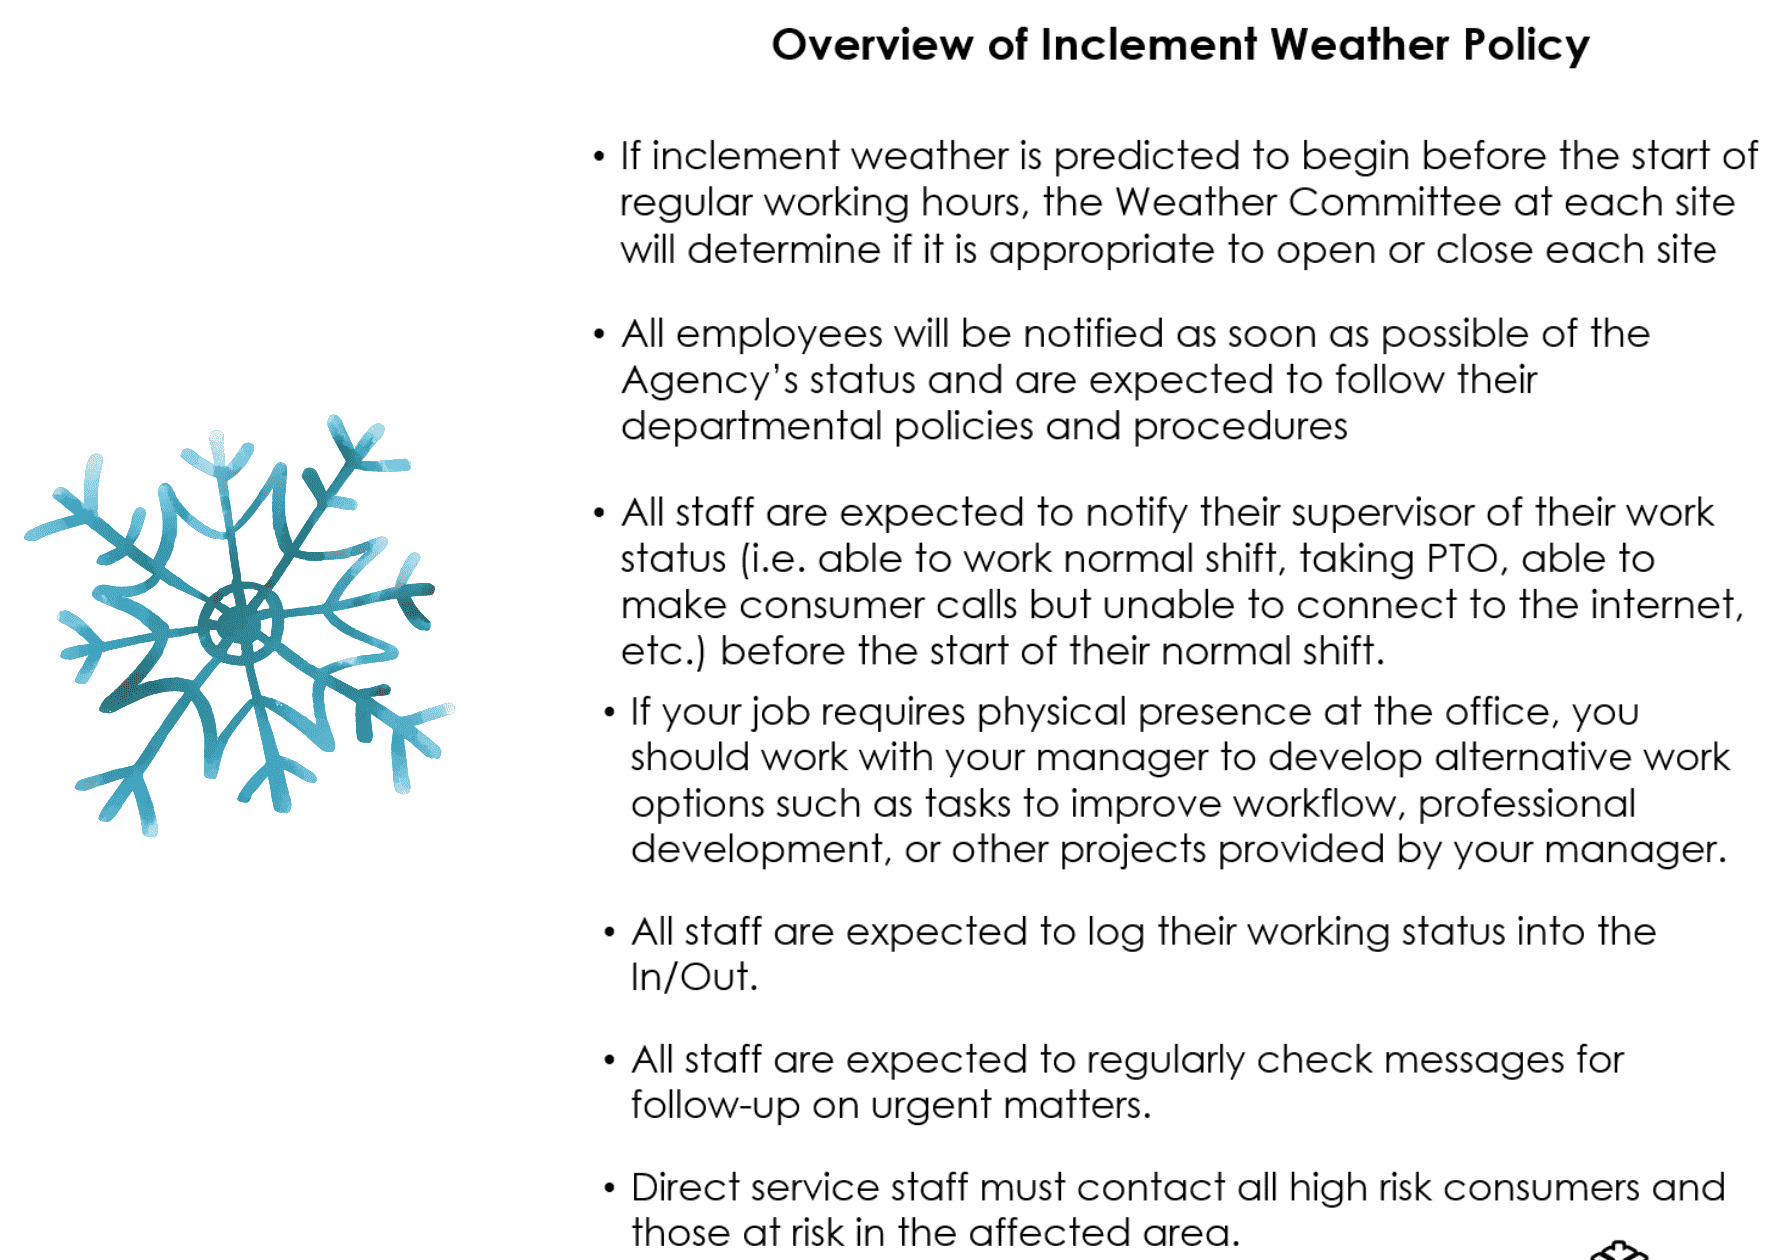 The Guide to an Inclement Weather Policy for HR AttendanceBot